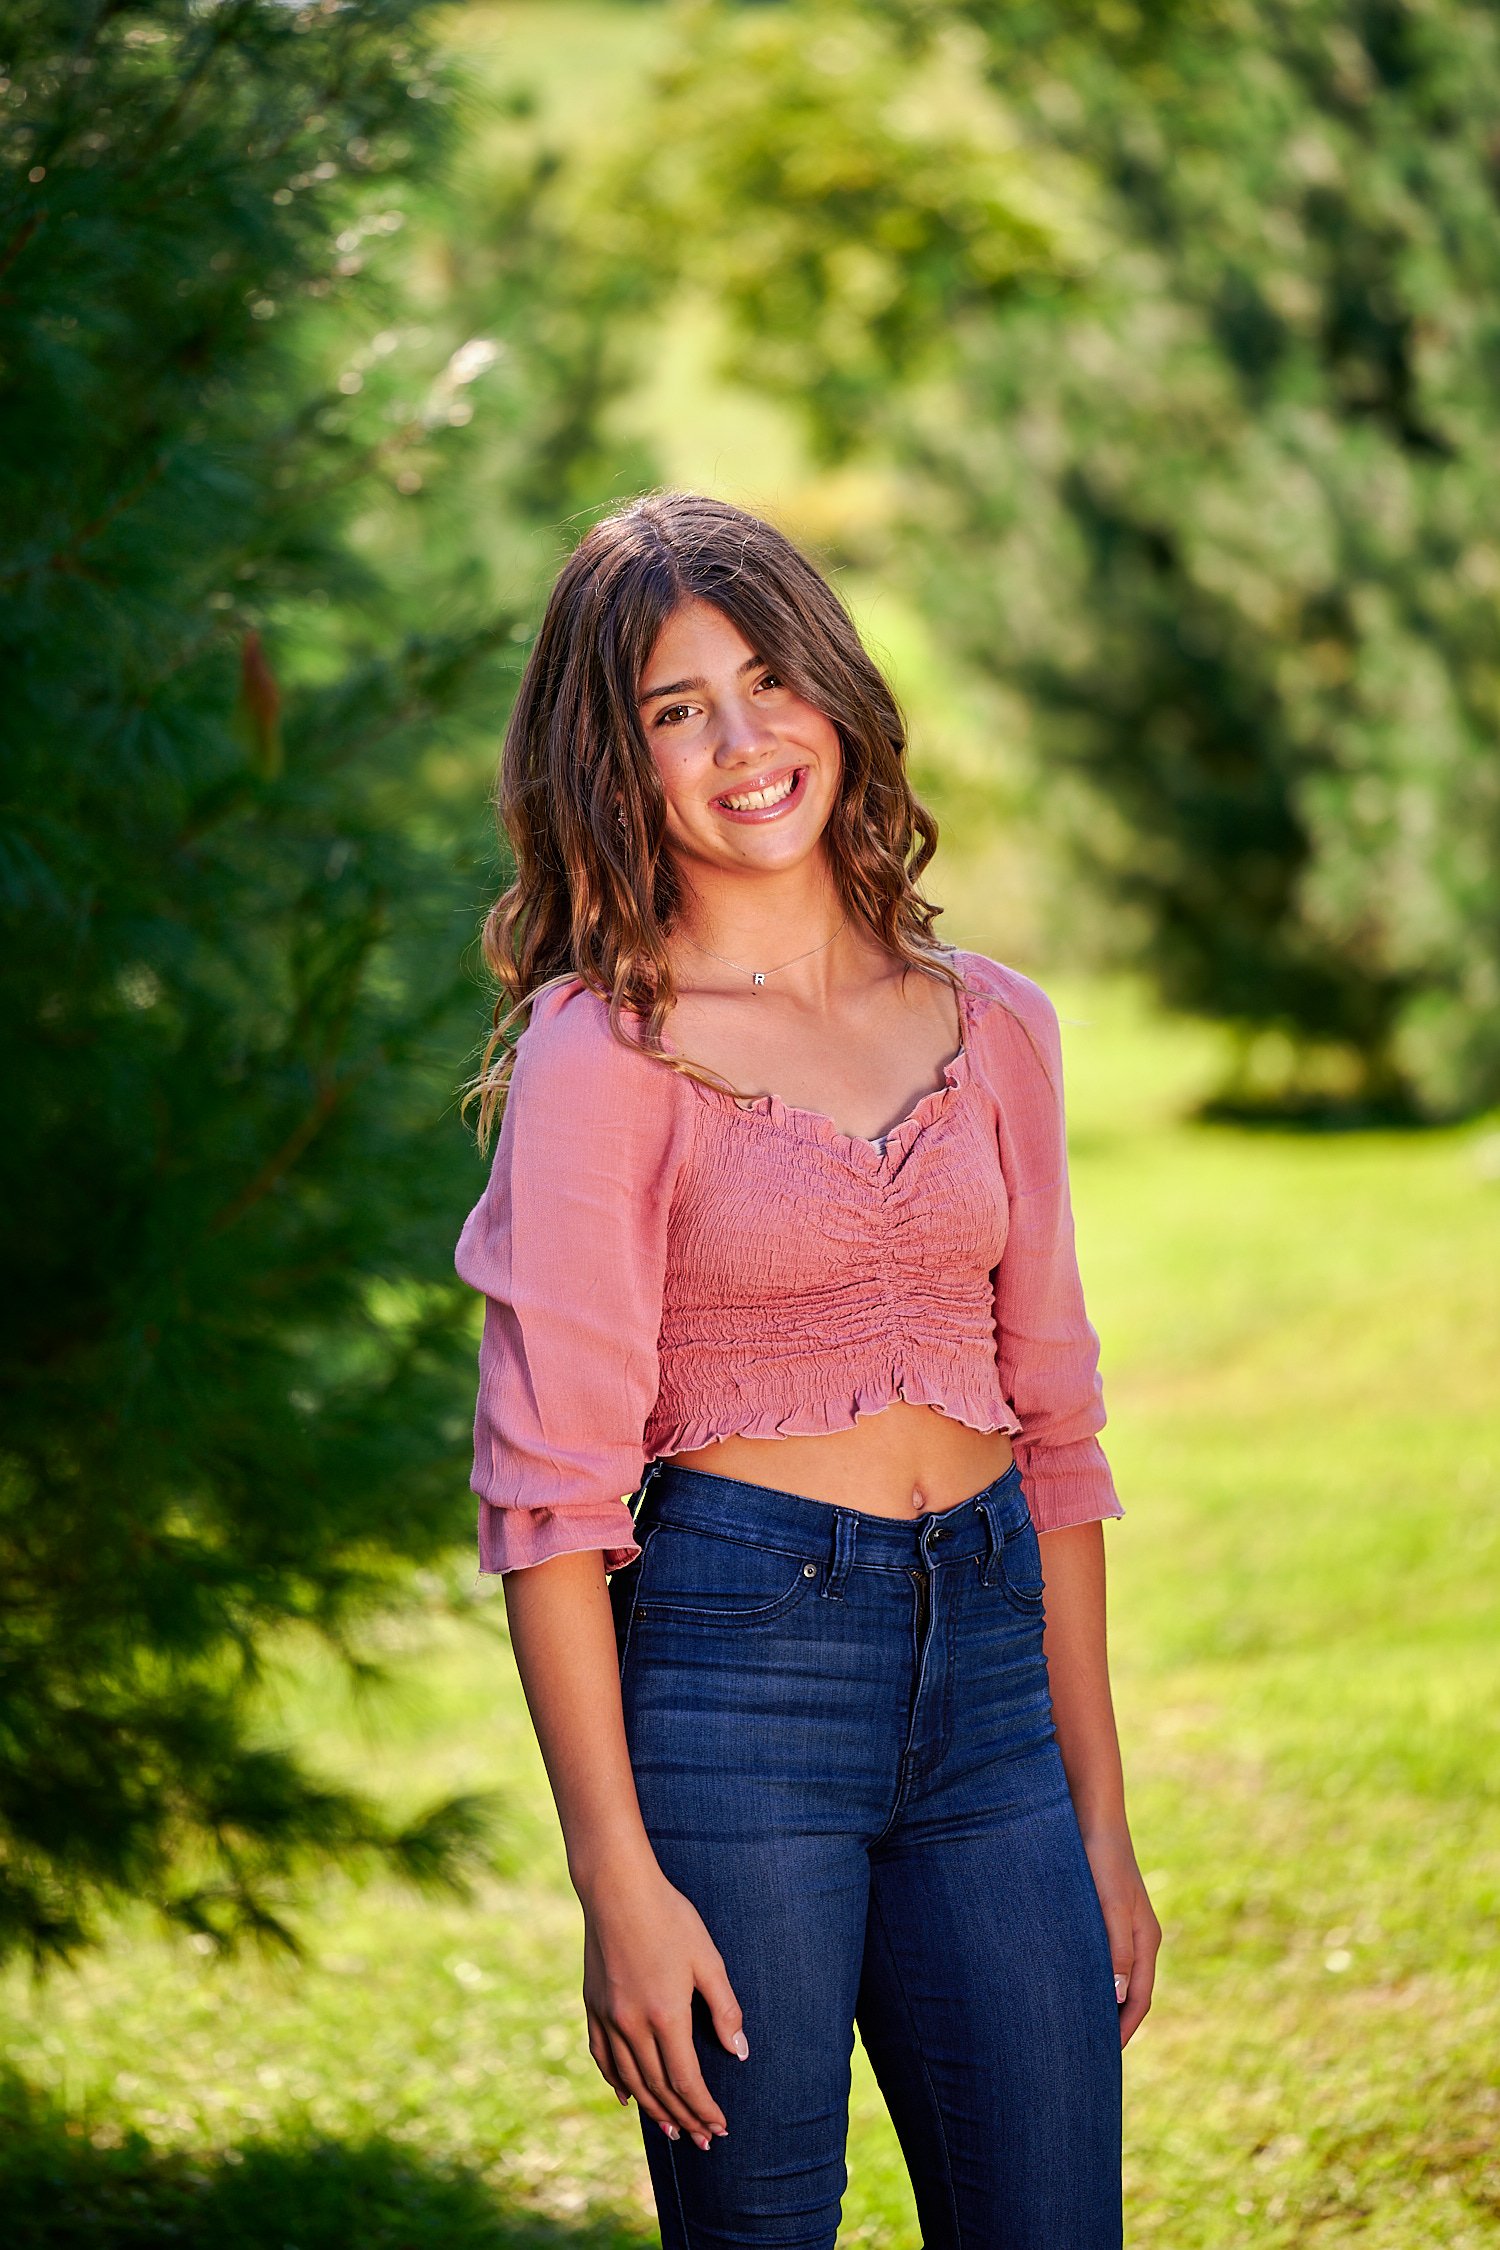  Natalie Koontz wanted a variety of shots of her three children - 13yo Resa , 11yo Jonah and 6yo Kenna and the whole family. Her brother had a session booked right after them, so we did a few shots too 